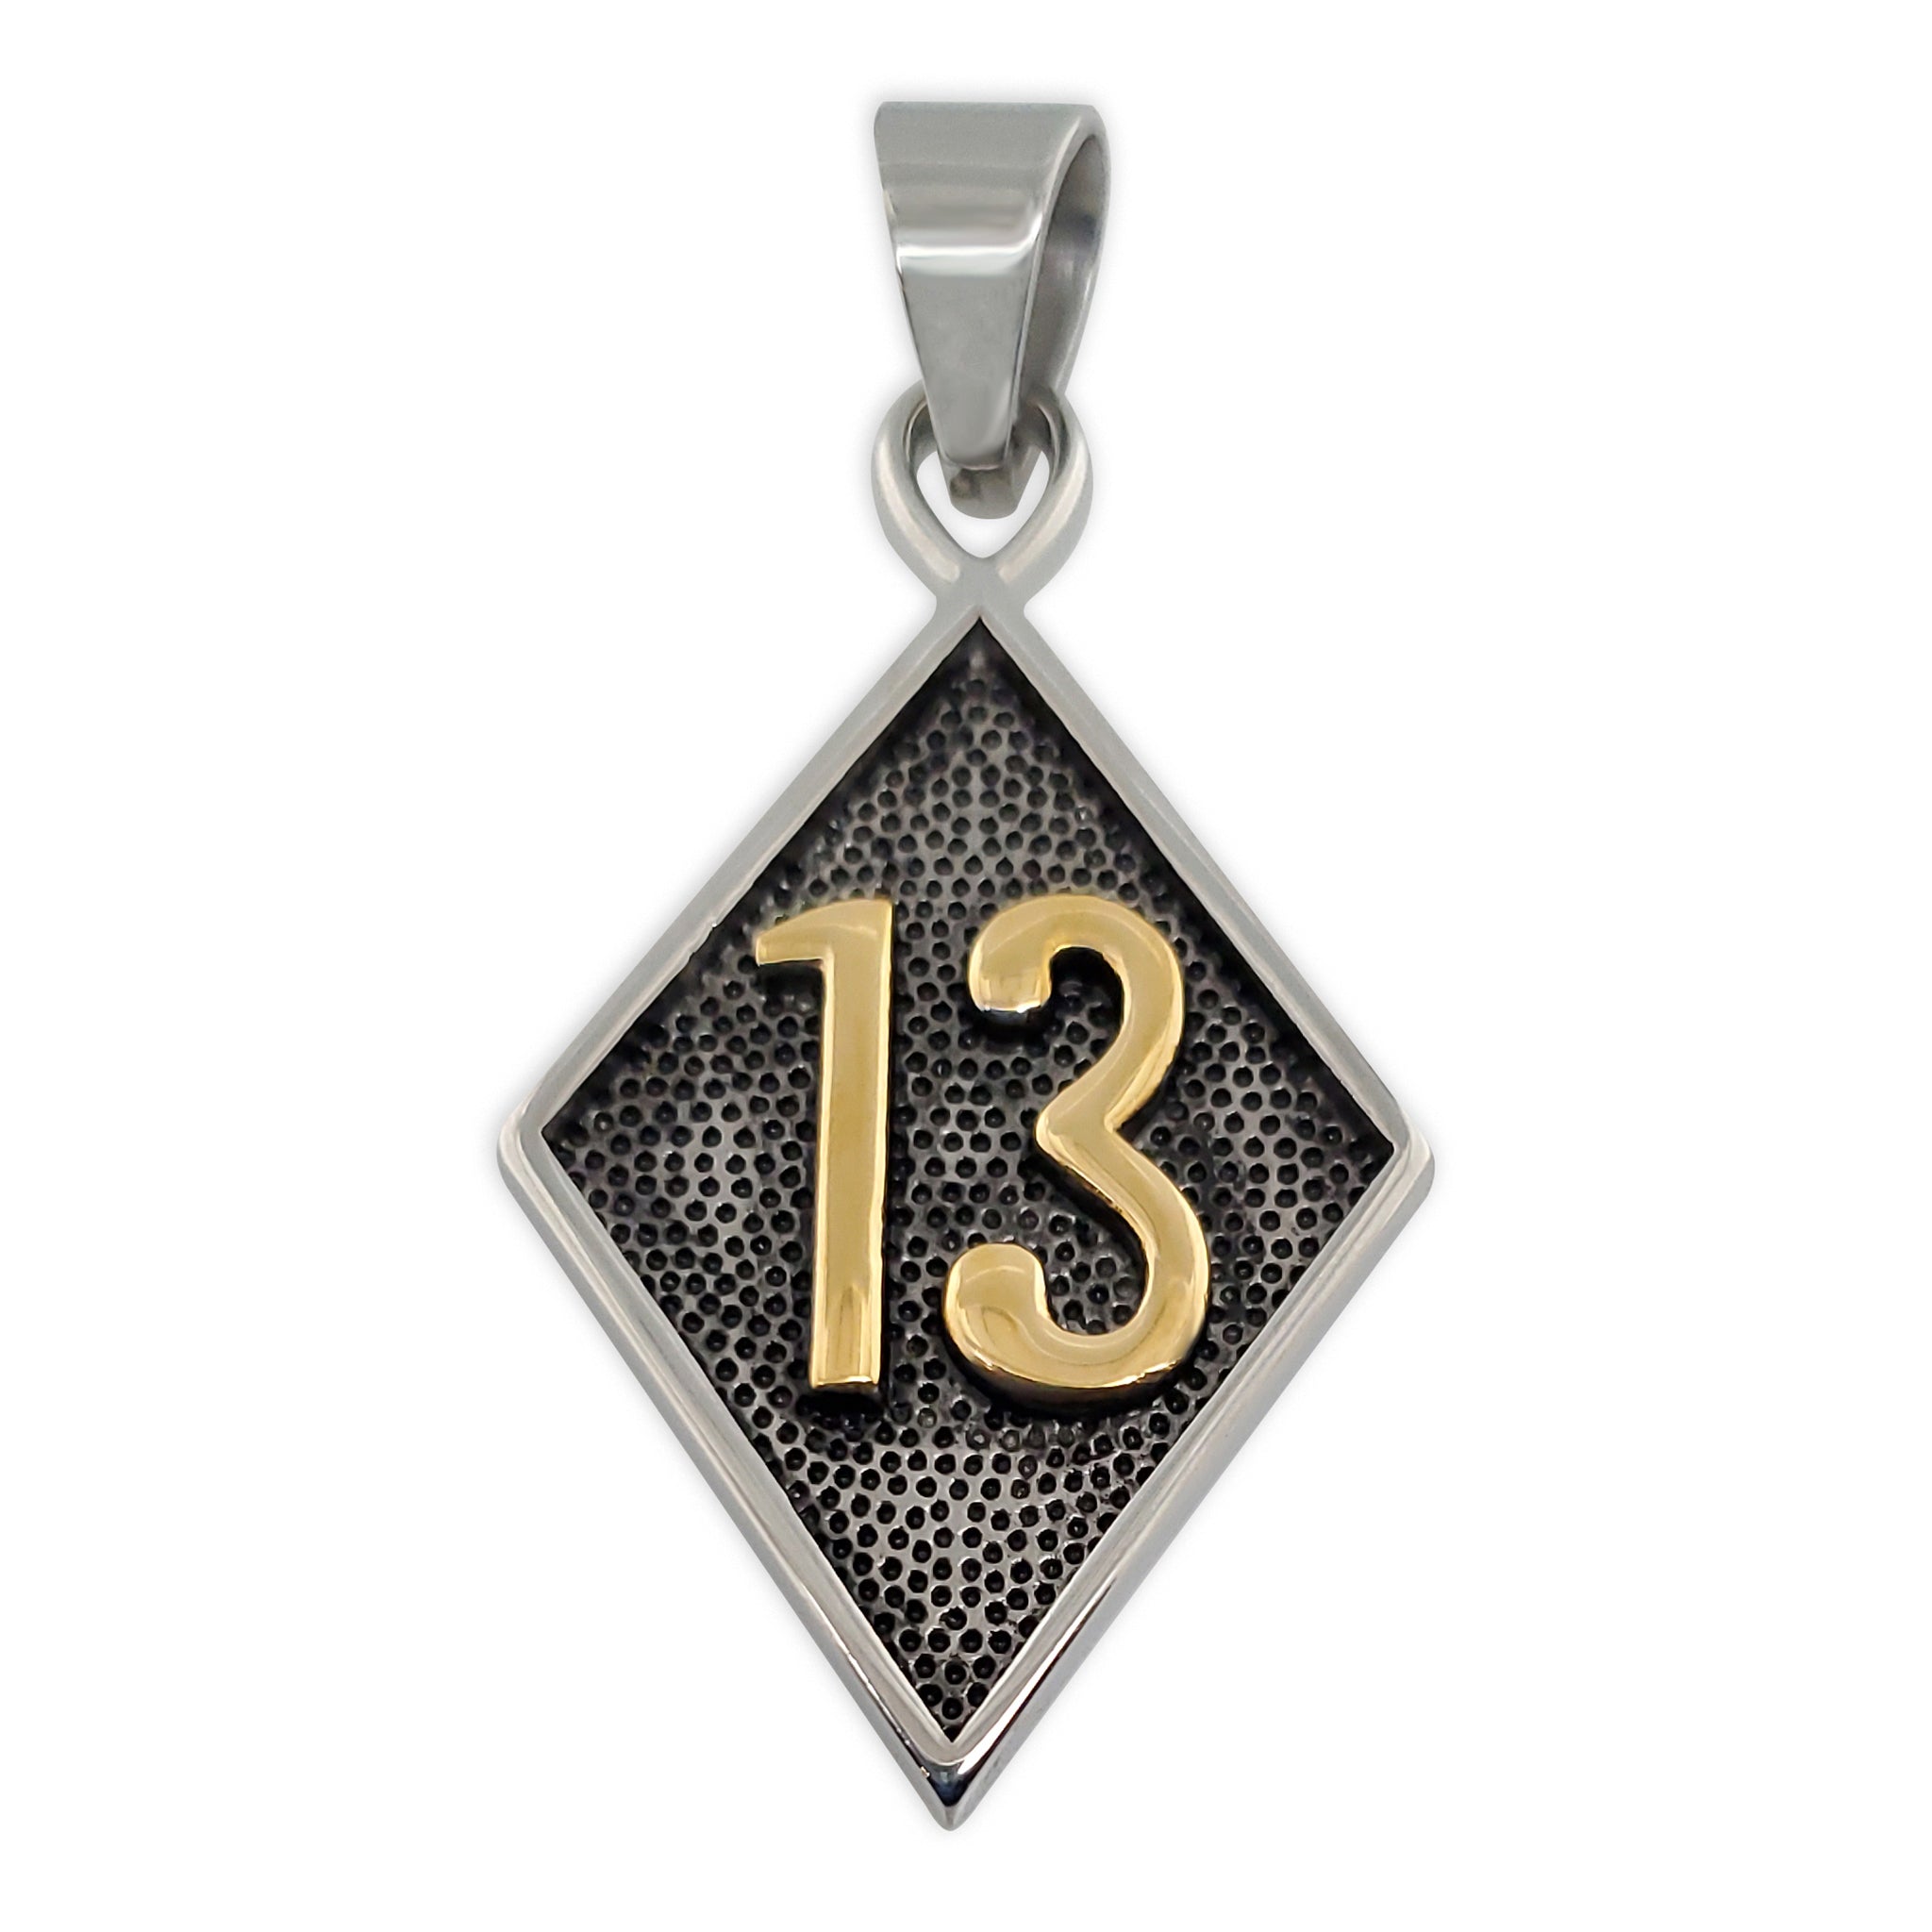 Stainless steel and 18K gold PVD Coated "13" pendant..